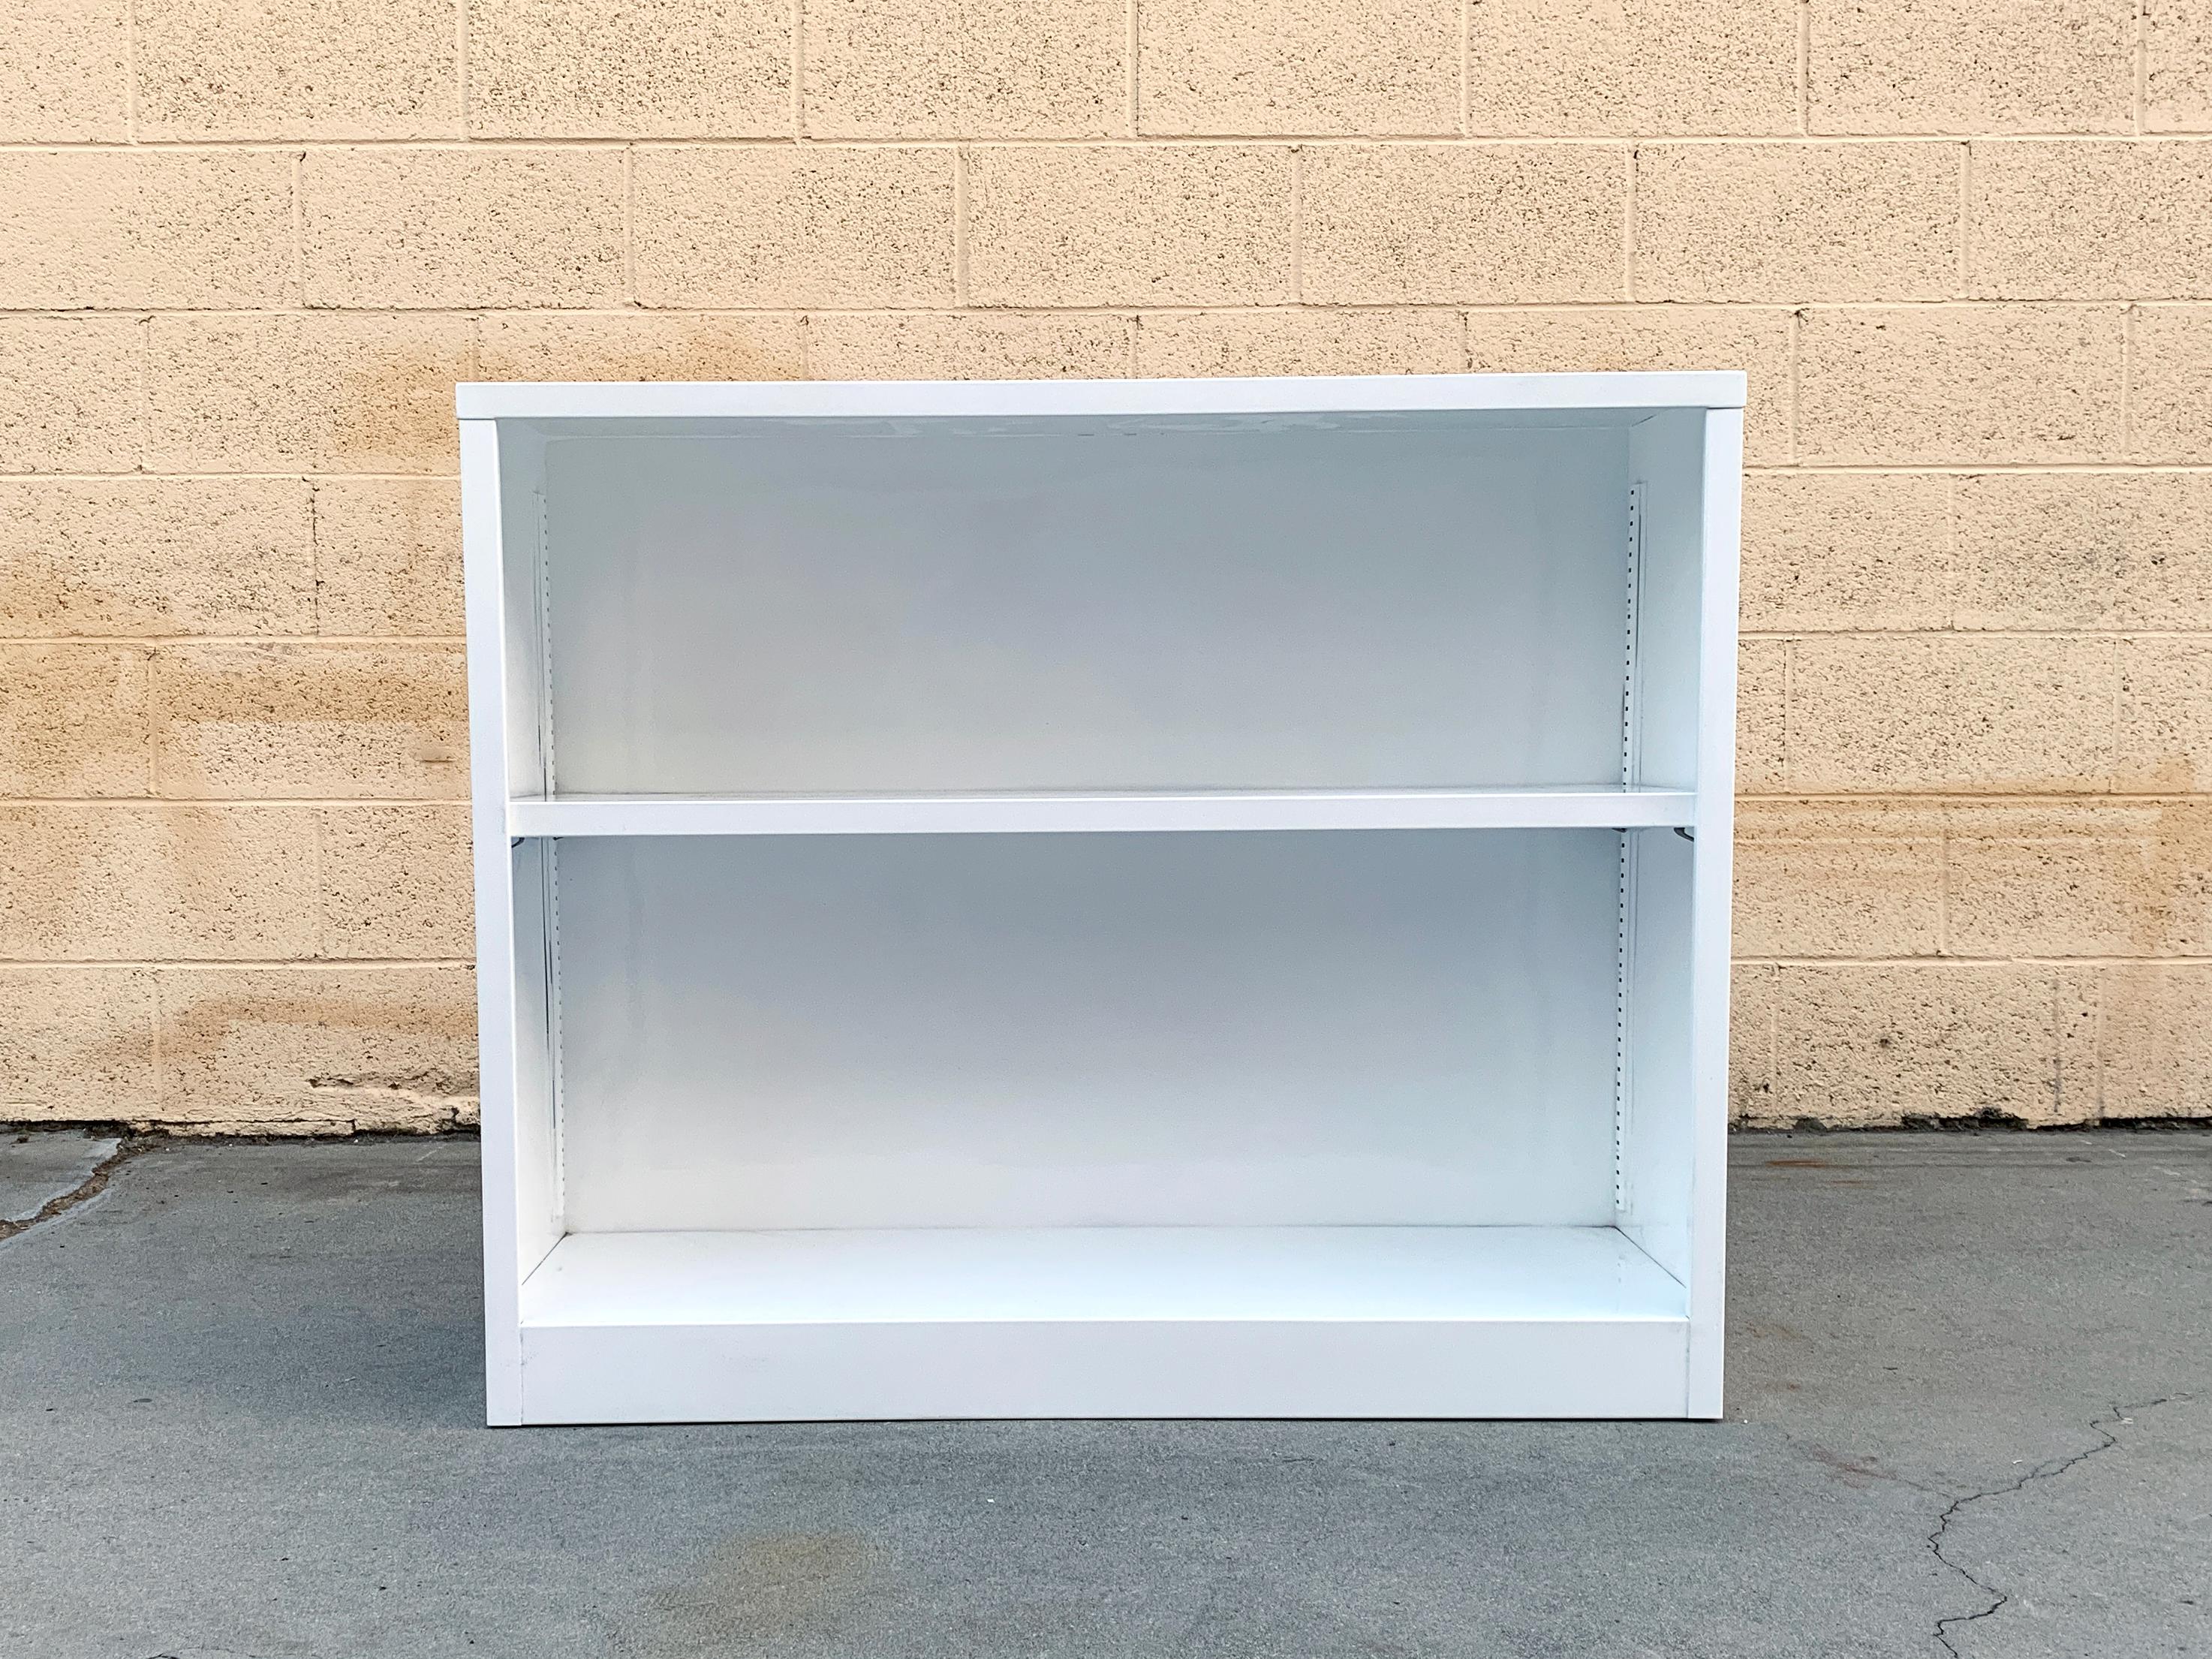 This midcentury tanker bookcase is an uncommon, petit size, ideal for home offices or smaller spaces. Mix and match with all your favorite McDowell Craig and AllSteel accessories!

Newly refinished in gloss white with minimal wear to steel.